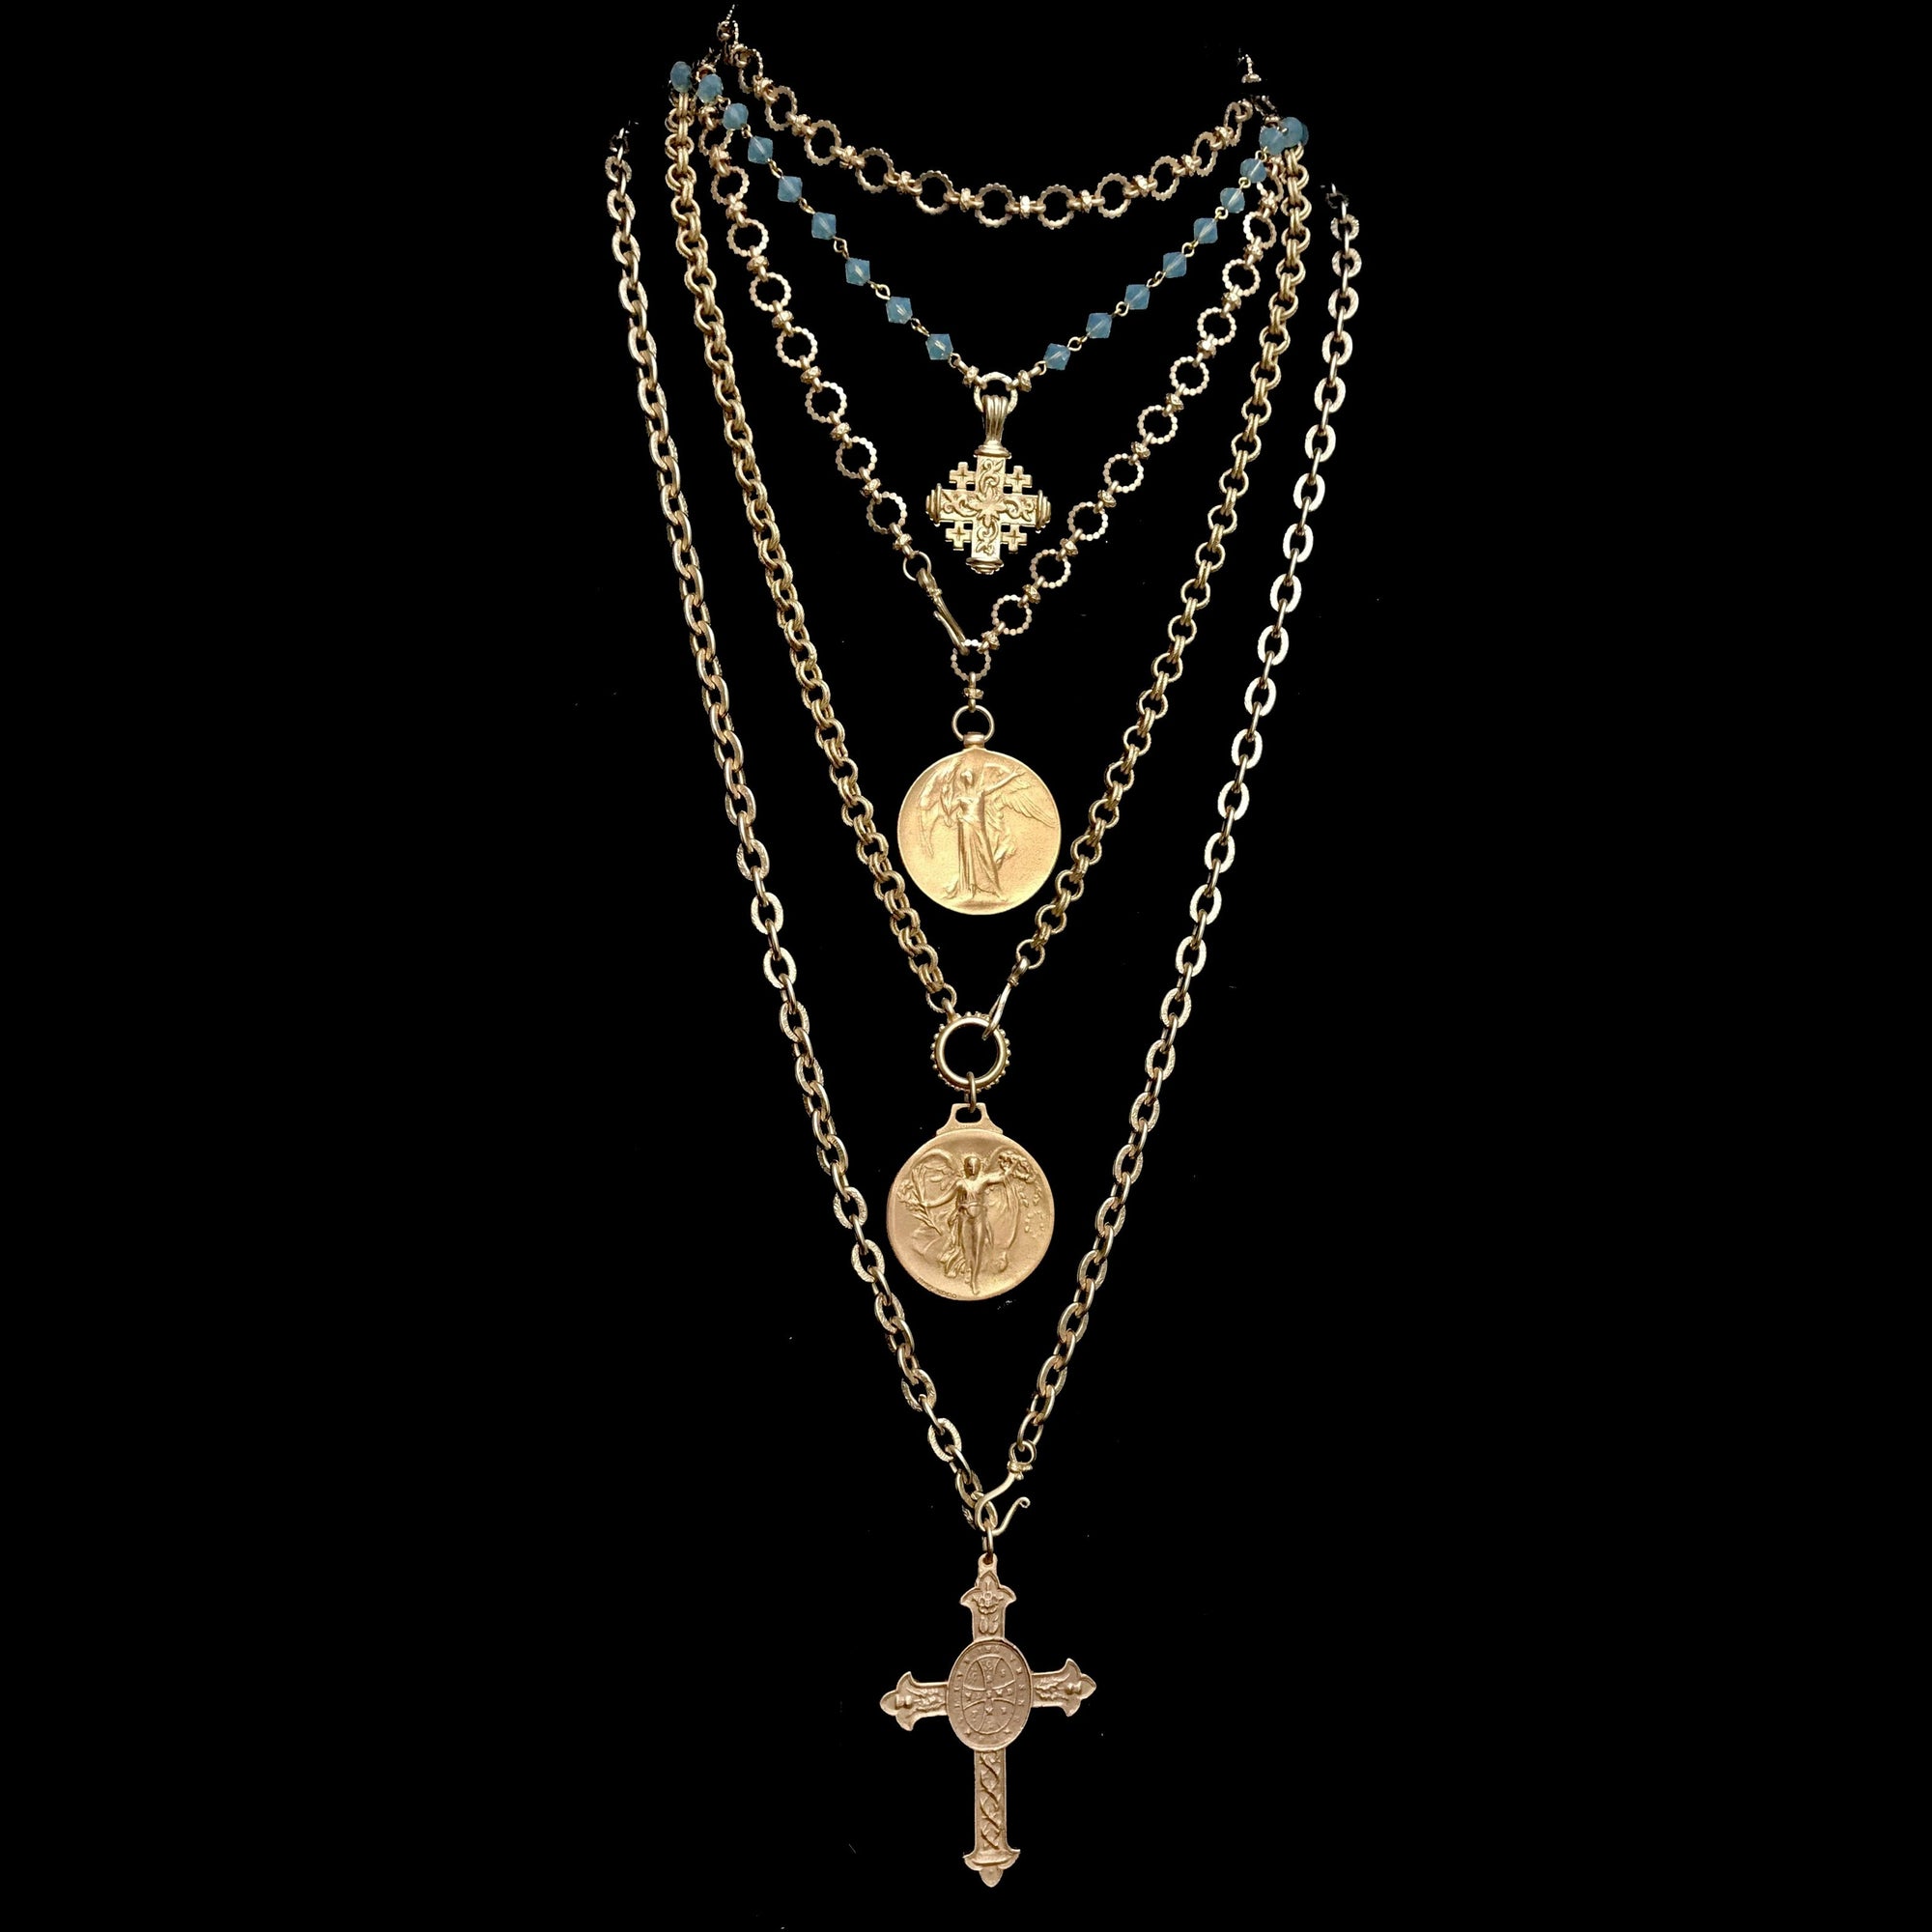 Cross of San Benito Cable Necklace by Whispering Goddess - Gold